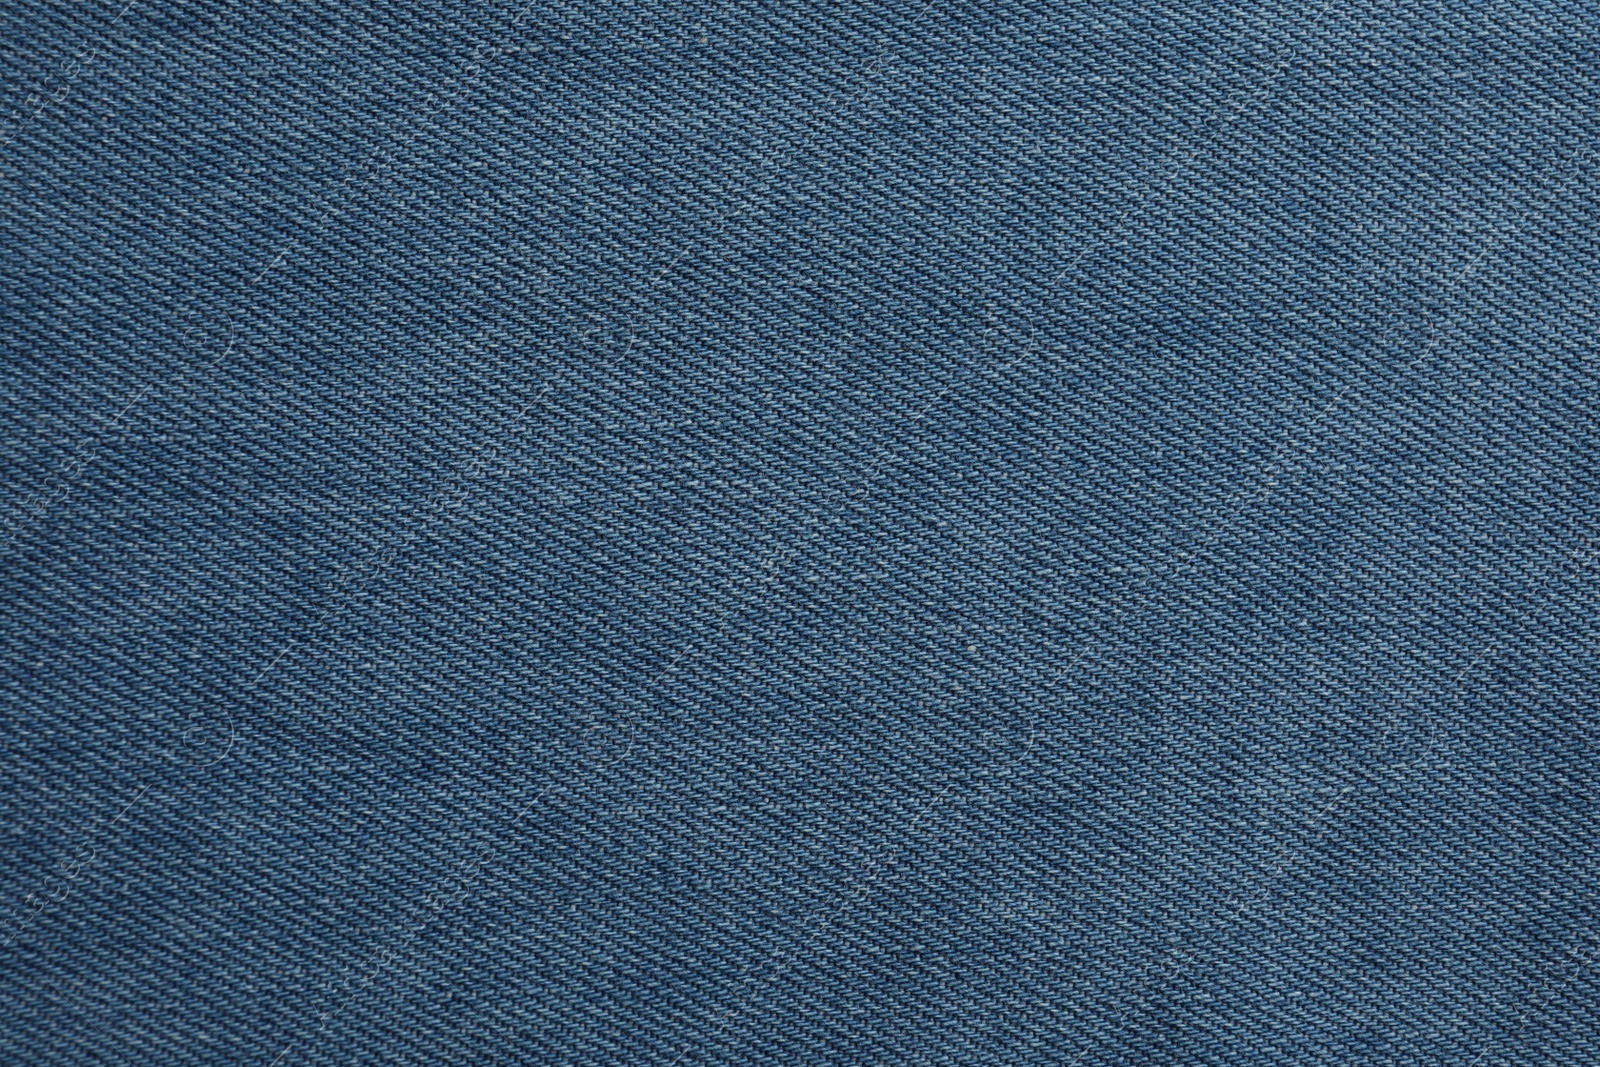 Photo of Texture of blue jeans as background, closeup